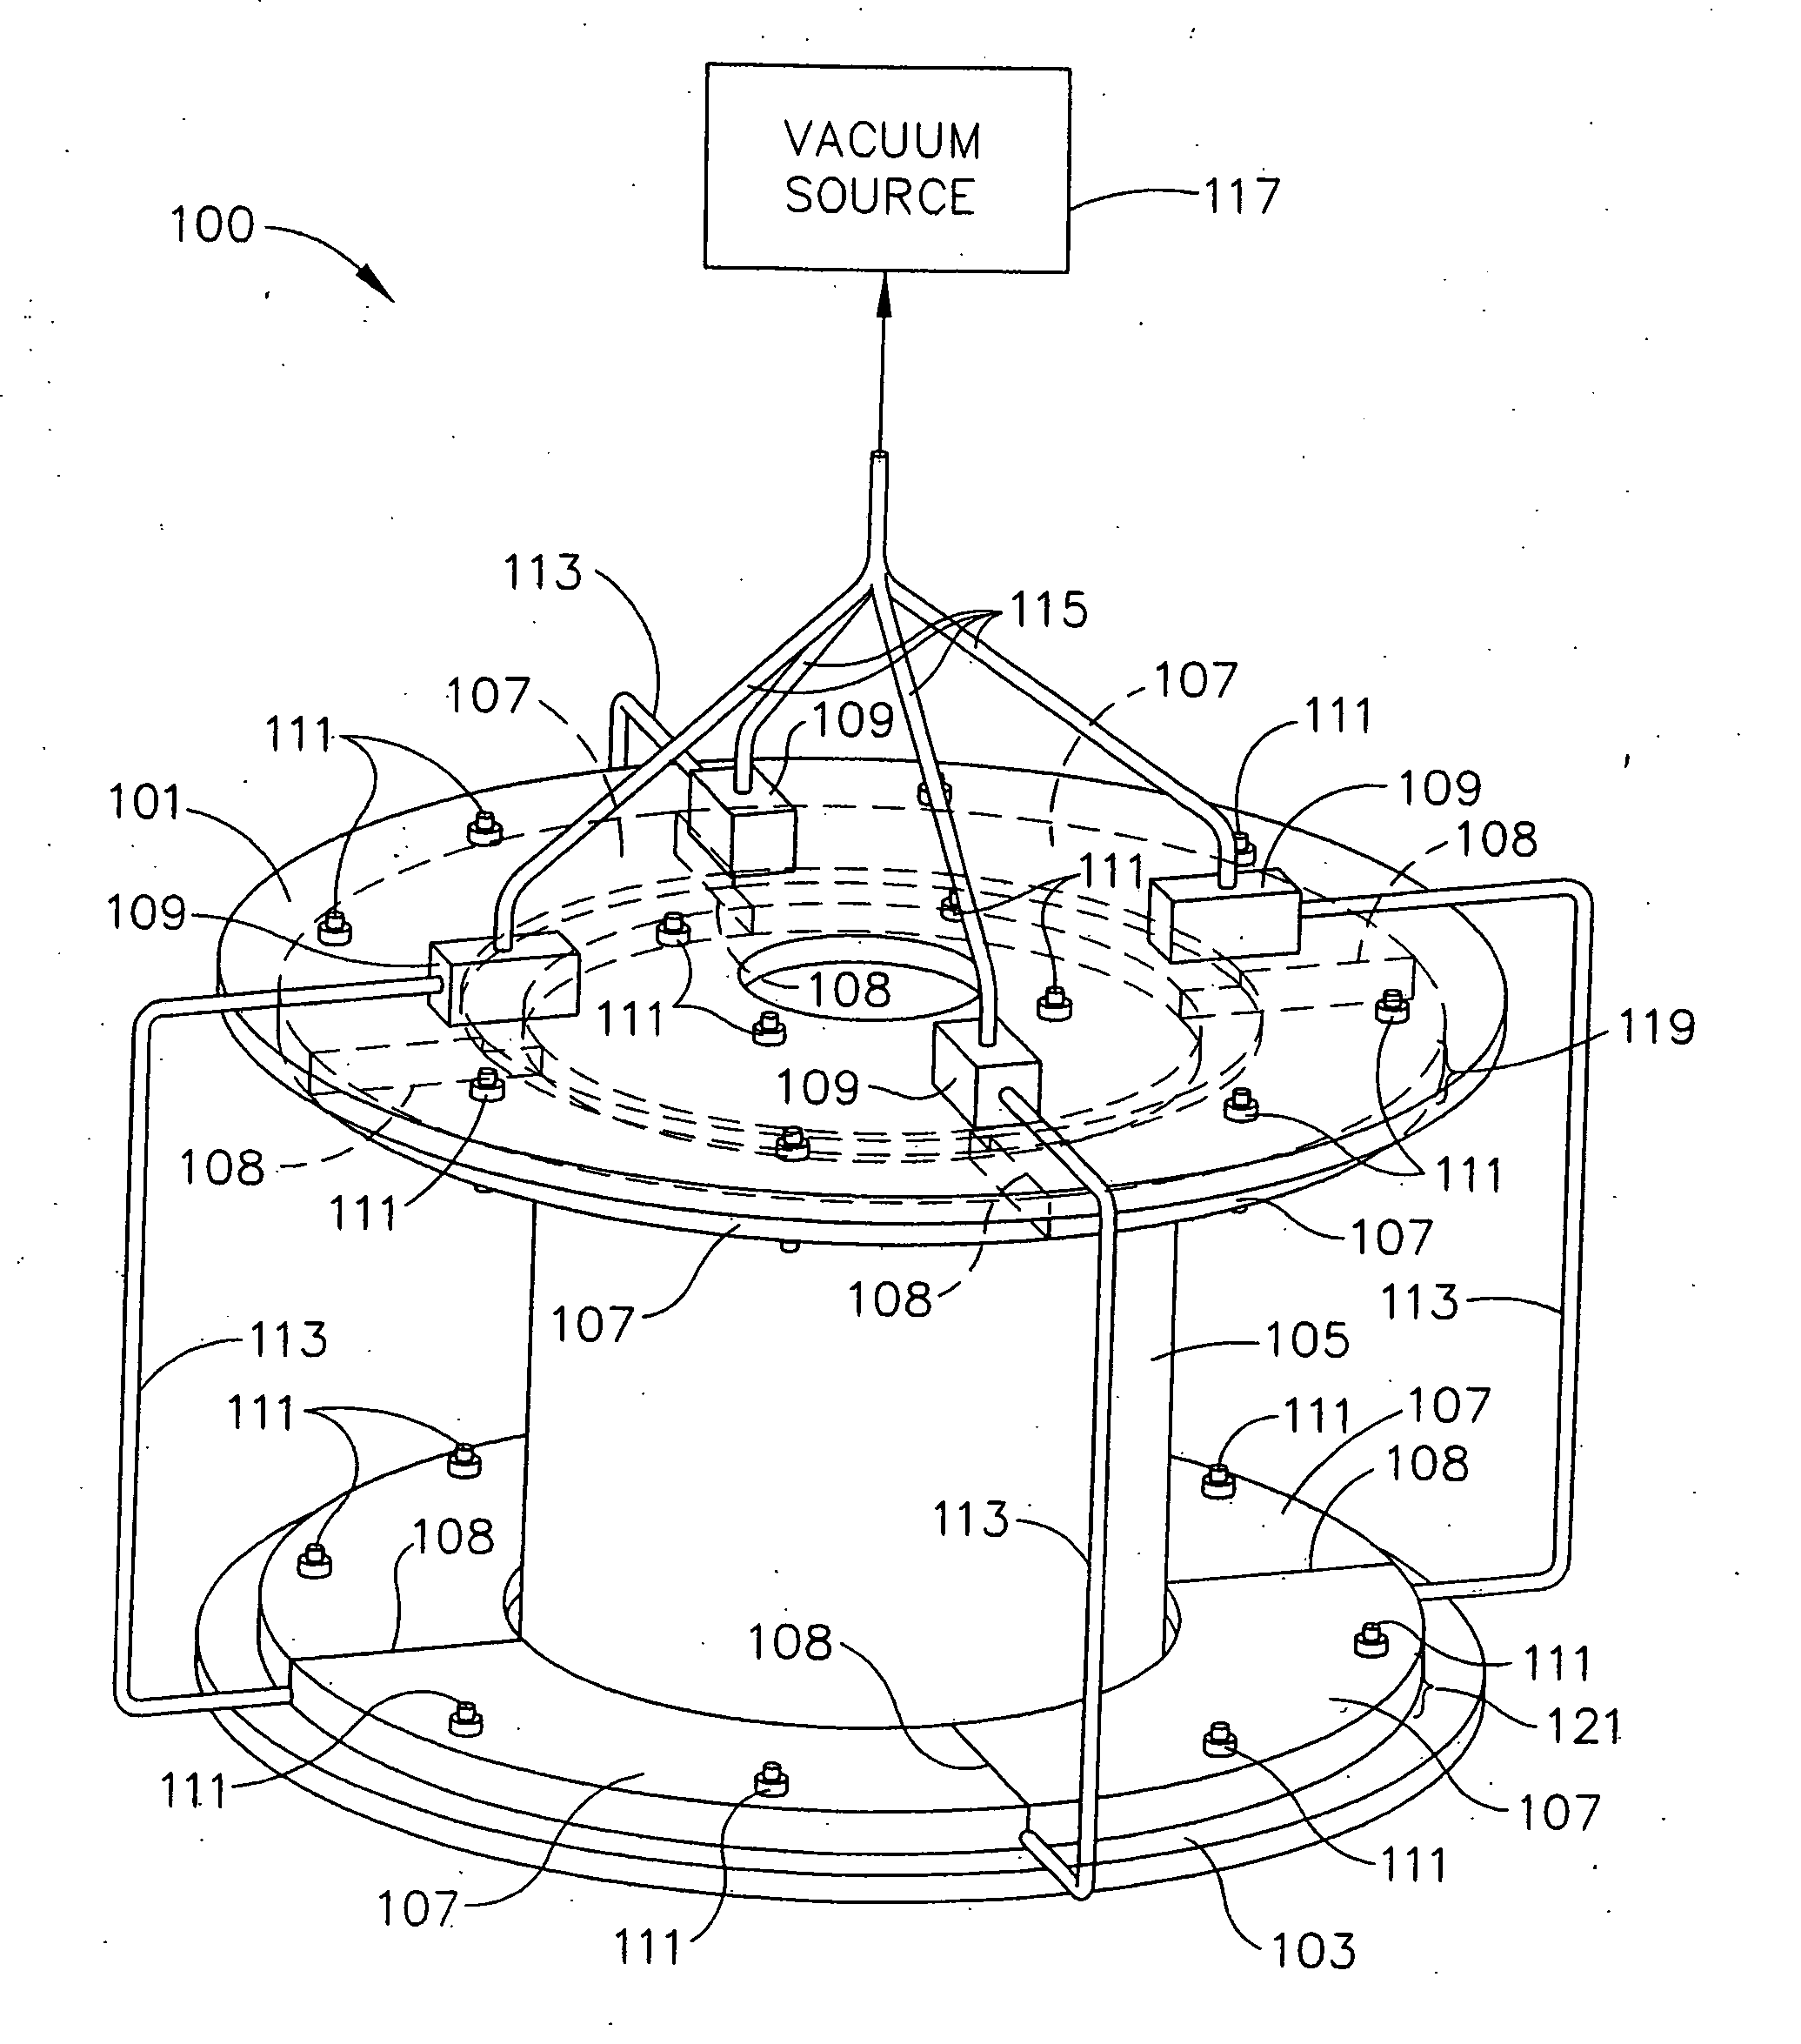 Apparatus for fabricating reinforced composite materials